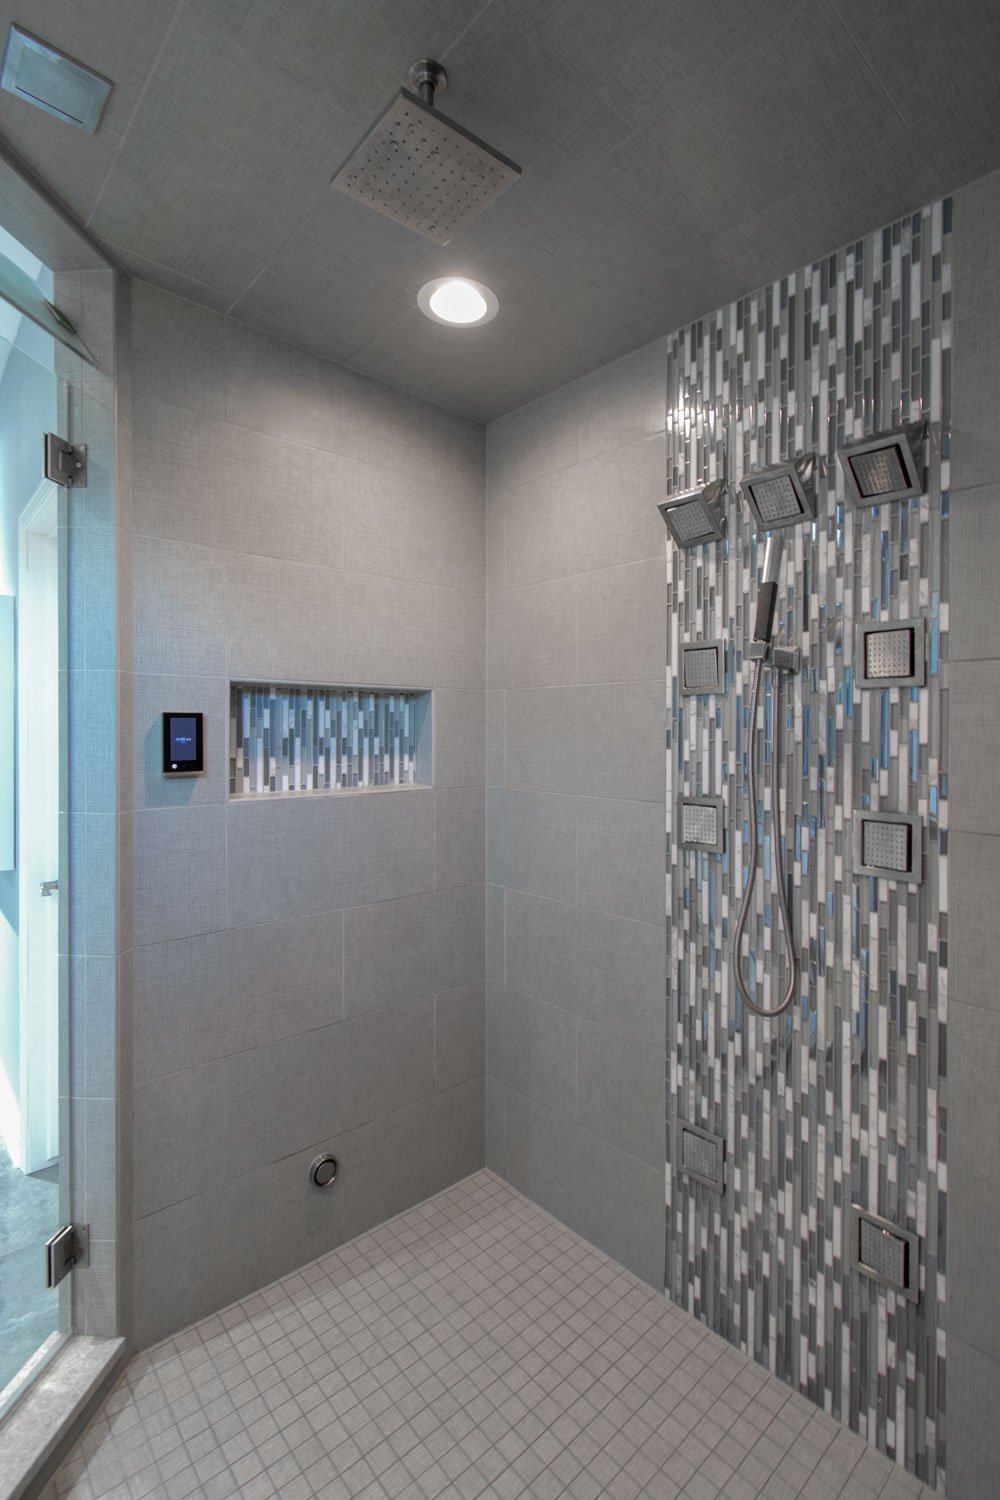 Lake country Kohler DTV digital showering system with mosaic accent tile